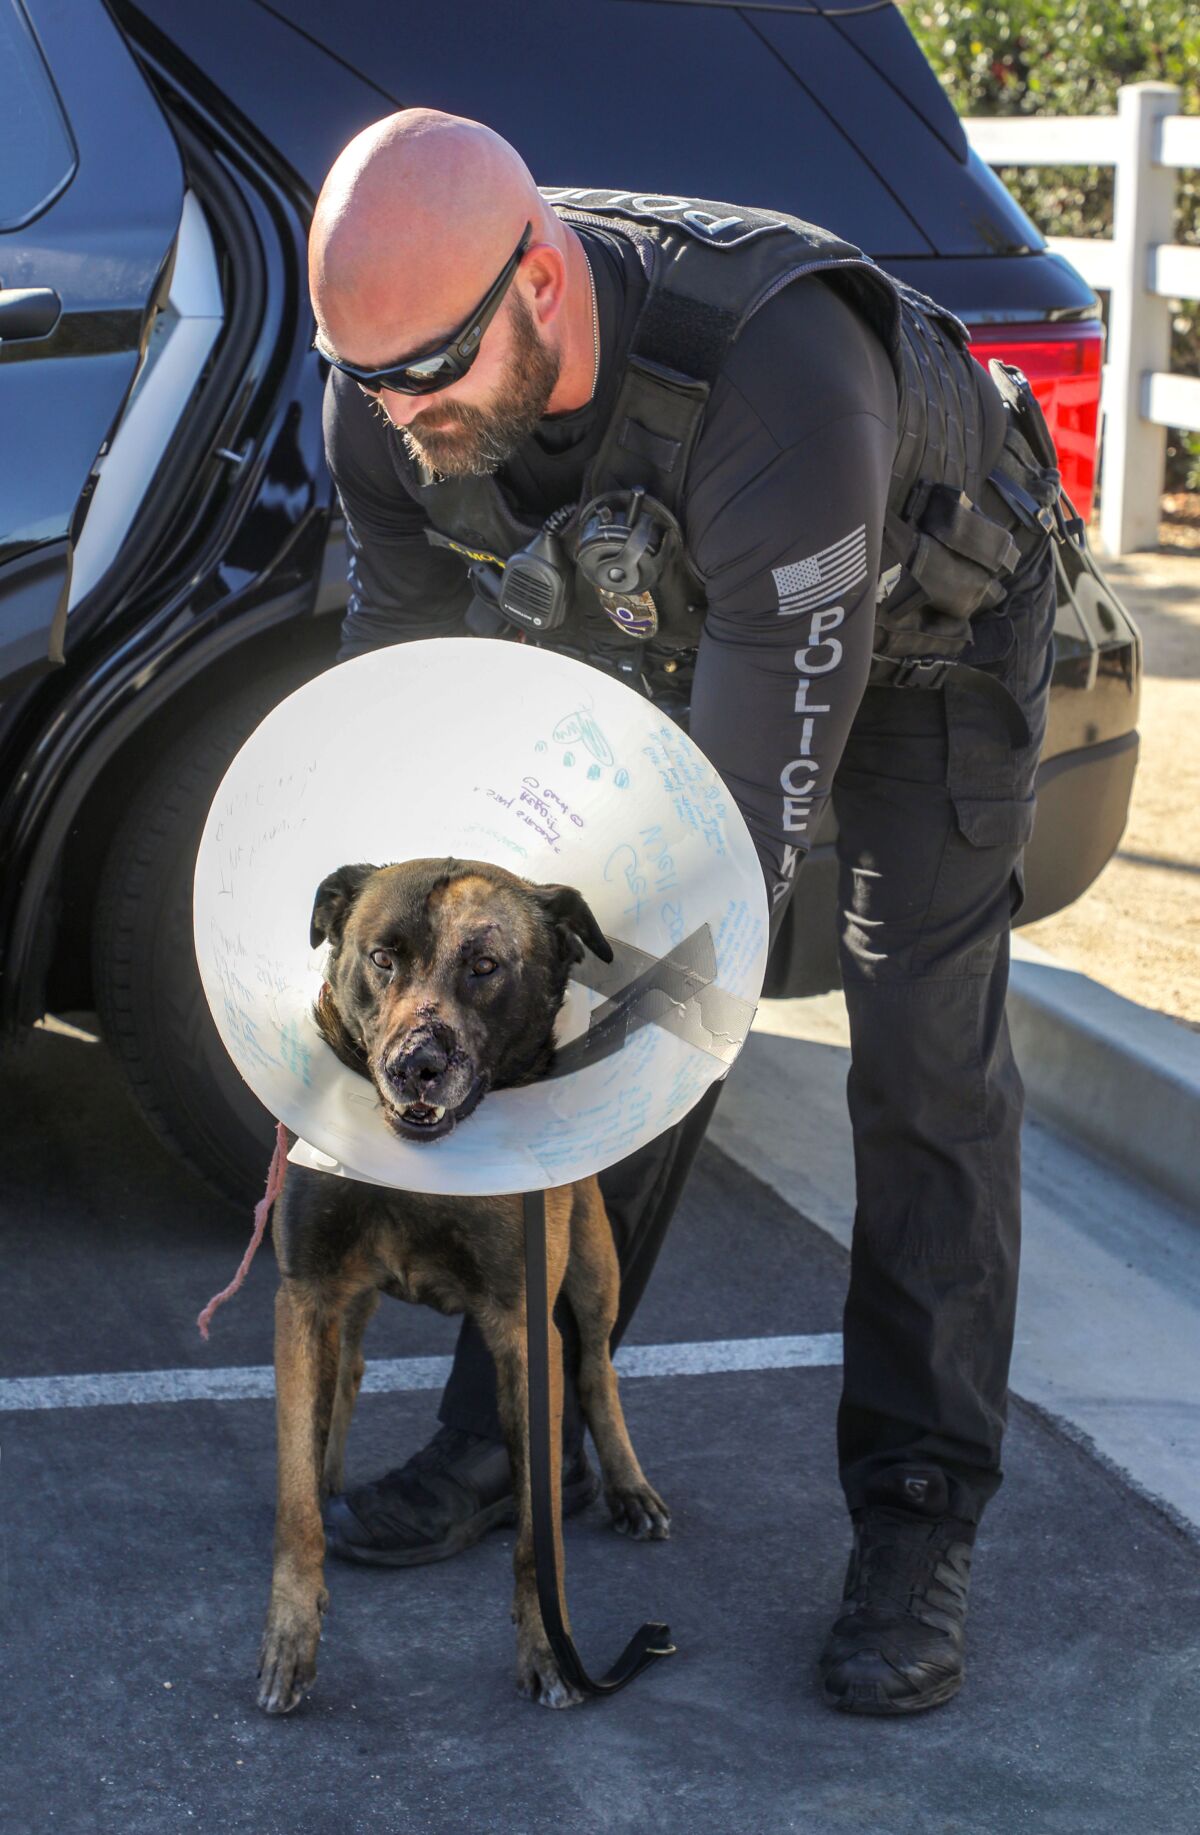 Escondido police Officer Chad Moore with his police dog, Aros.